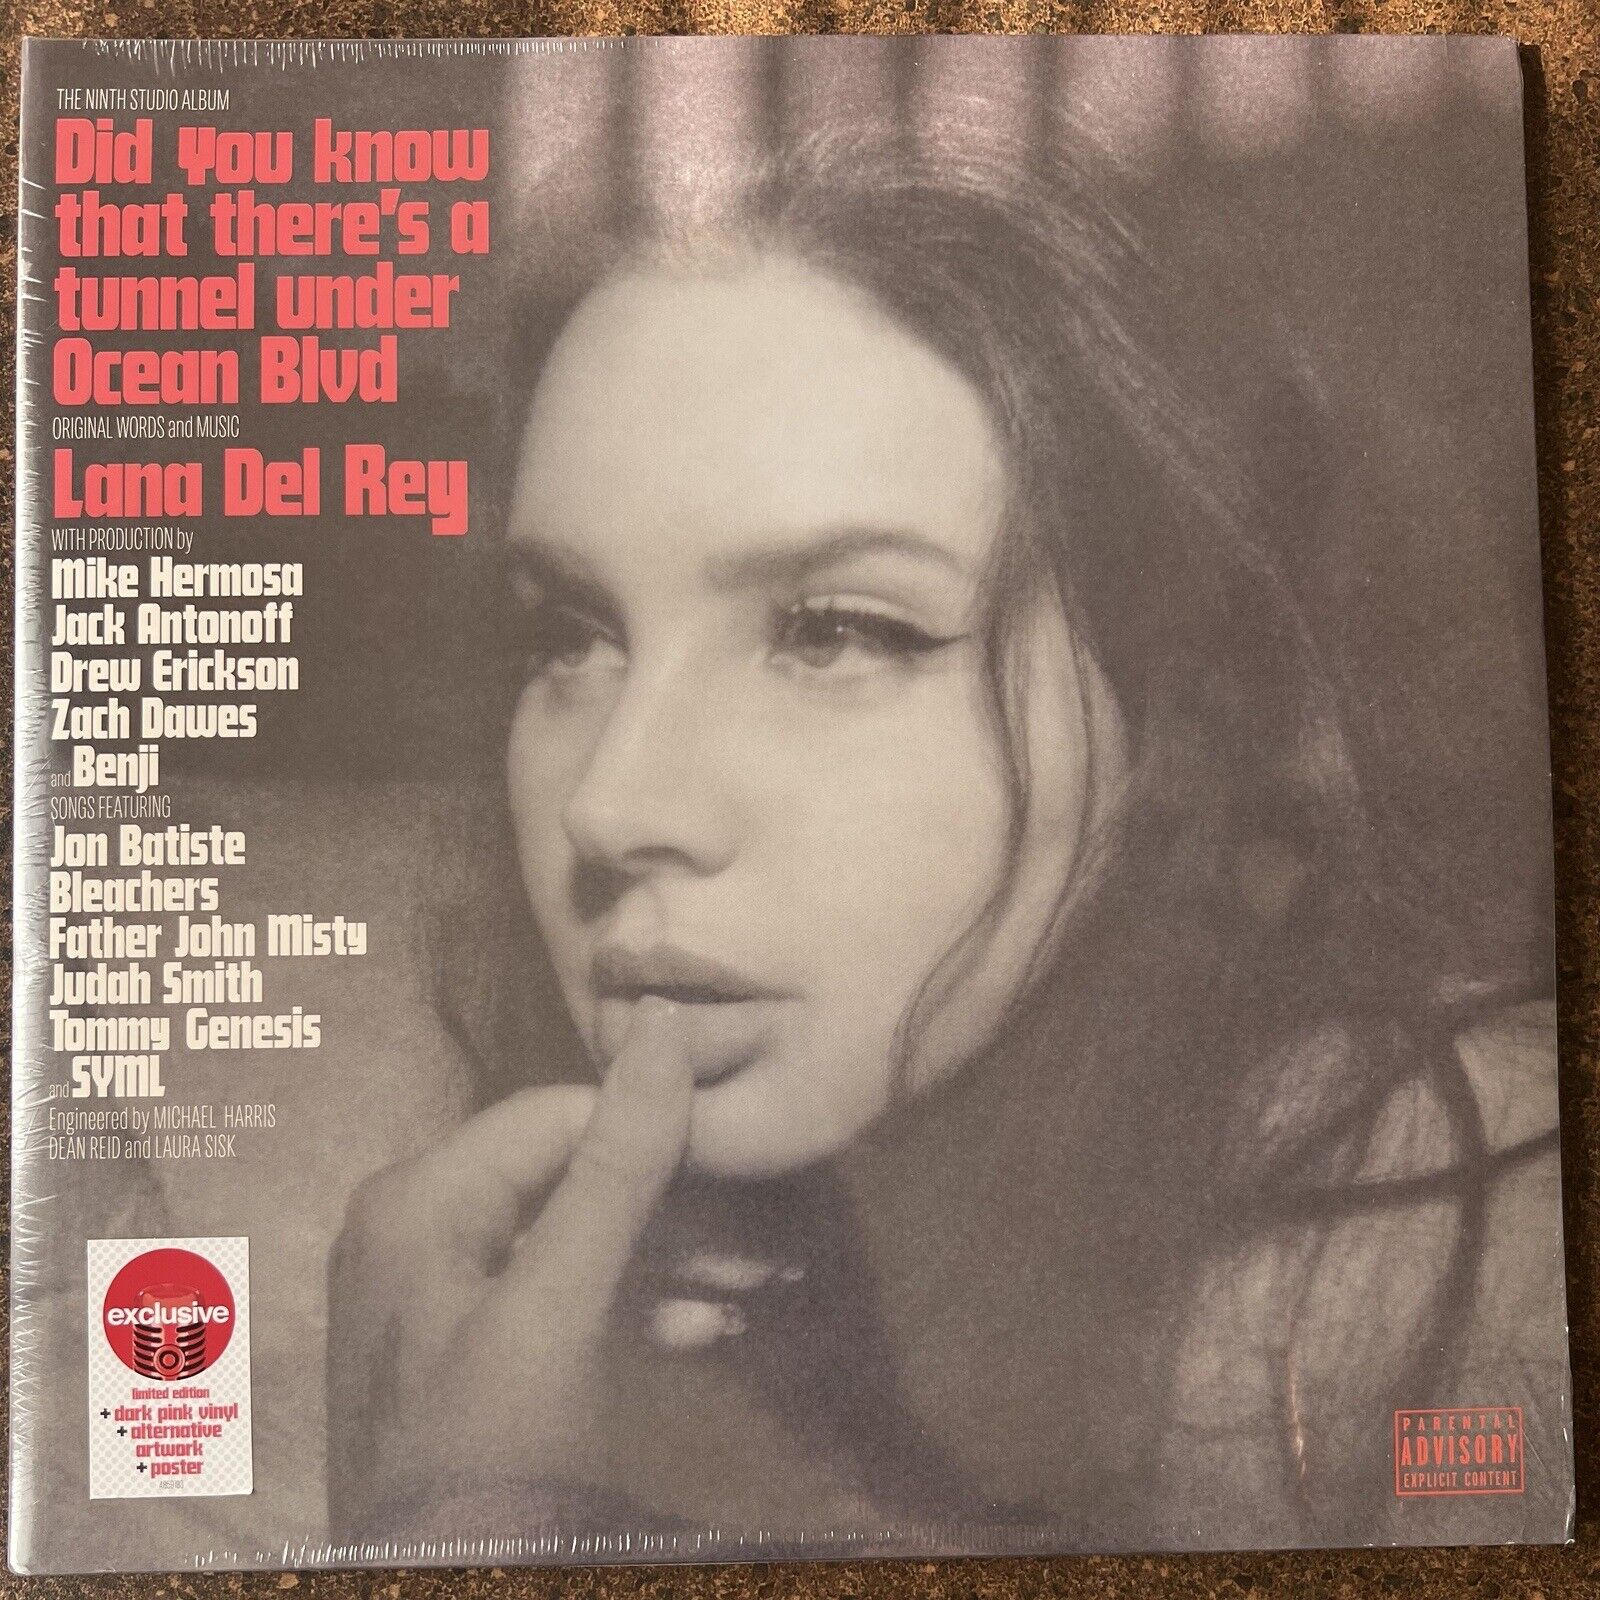 Did You Know That There's A Tunnel Under Ocean Blvd by Lana Del Rey (Record)